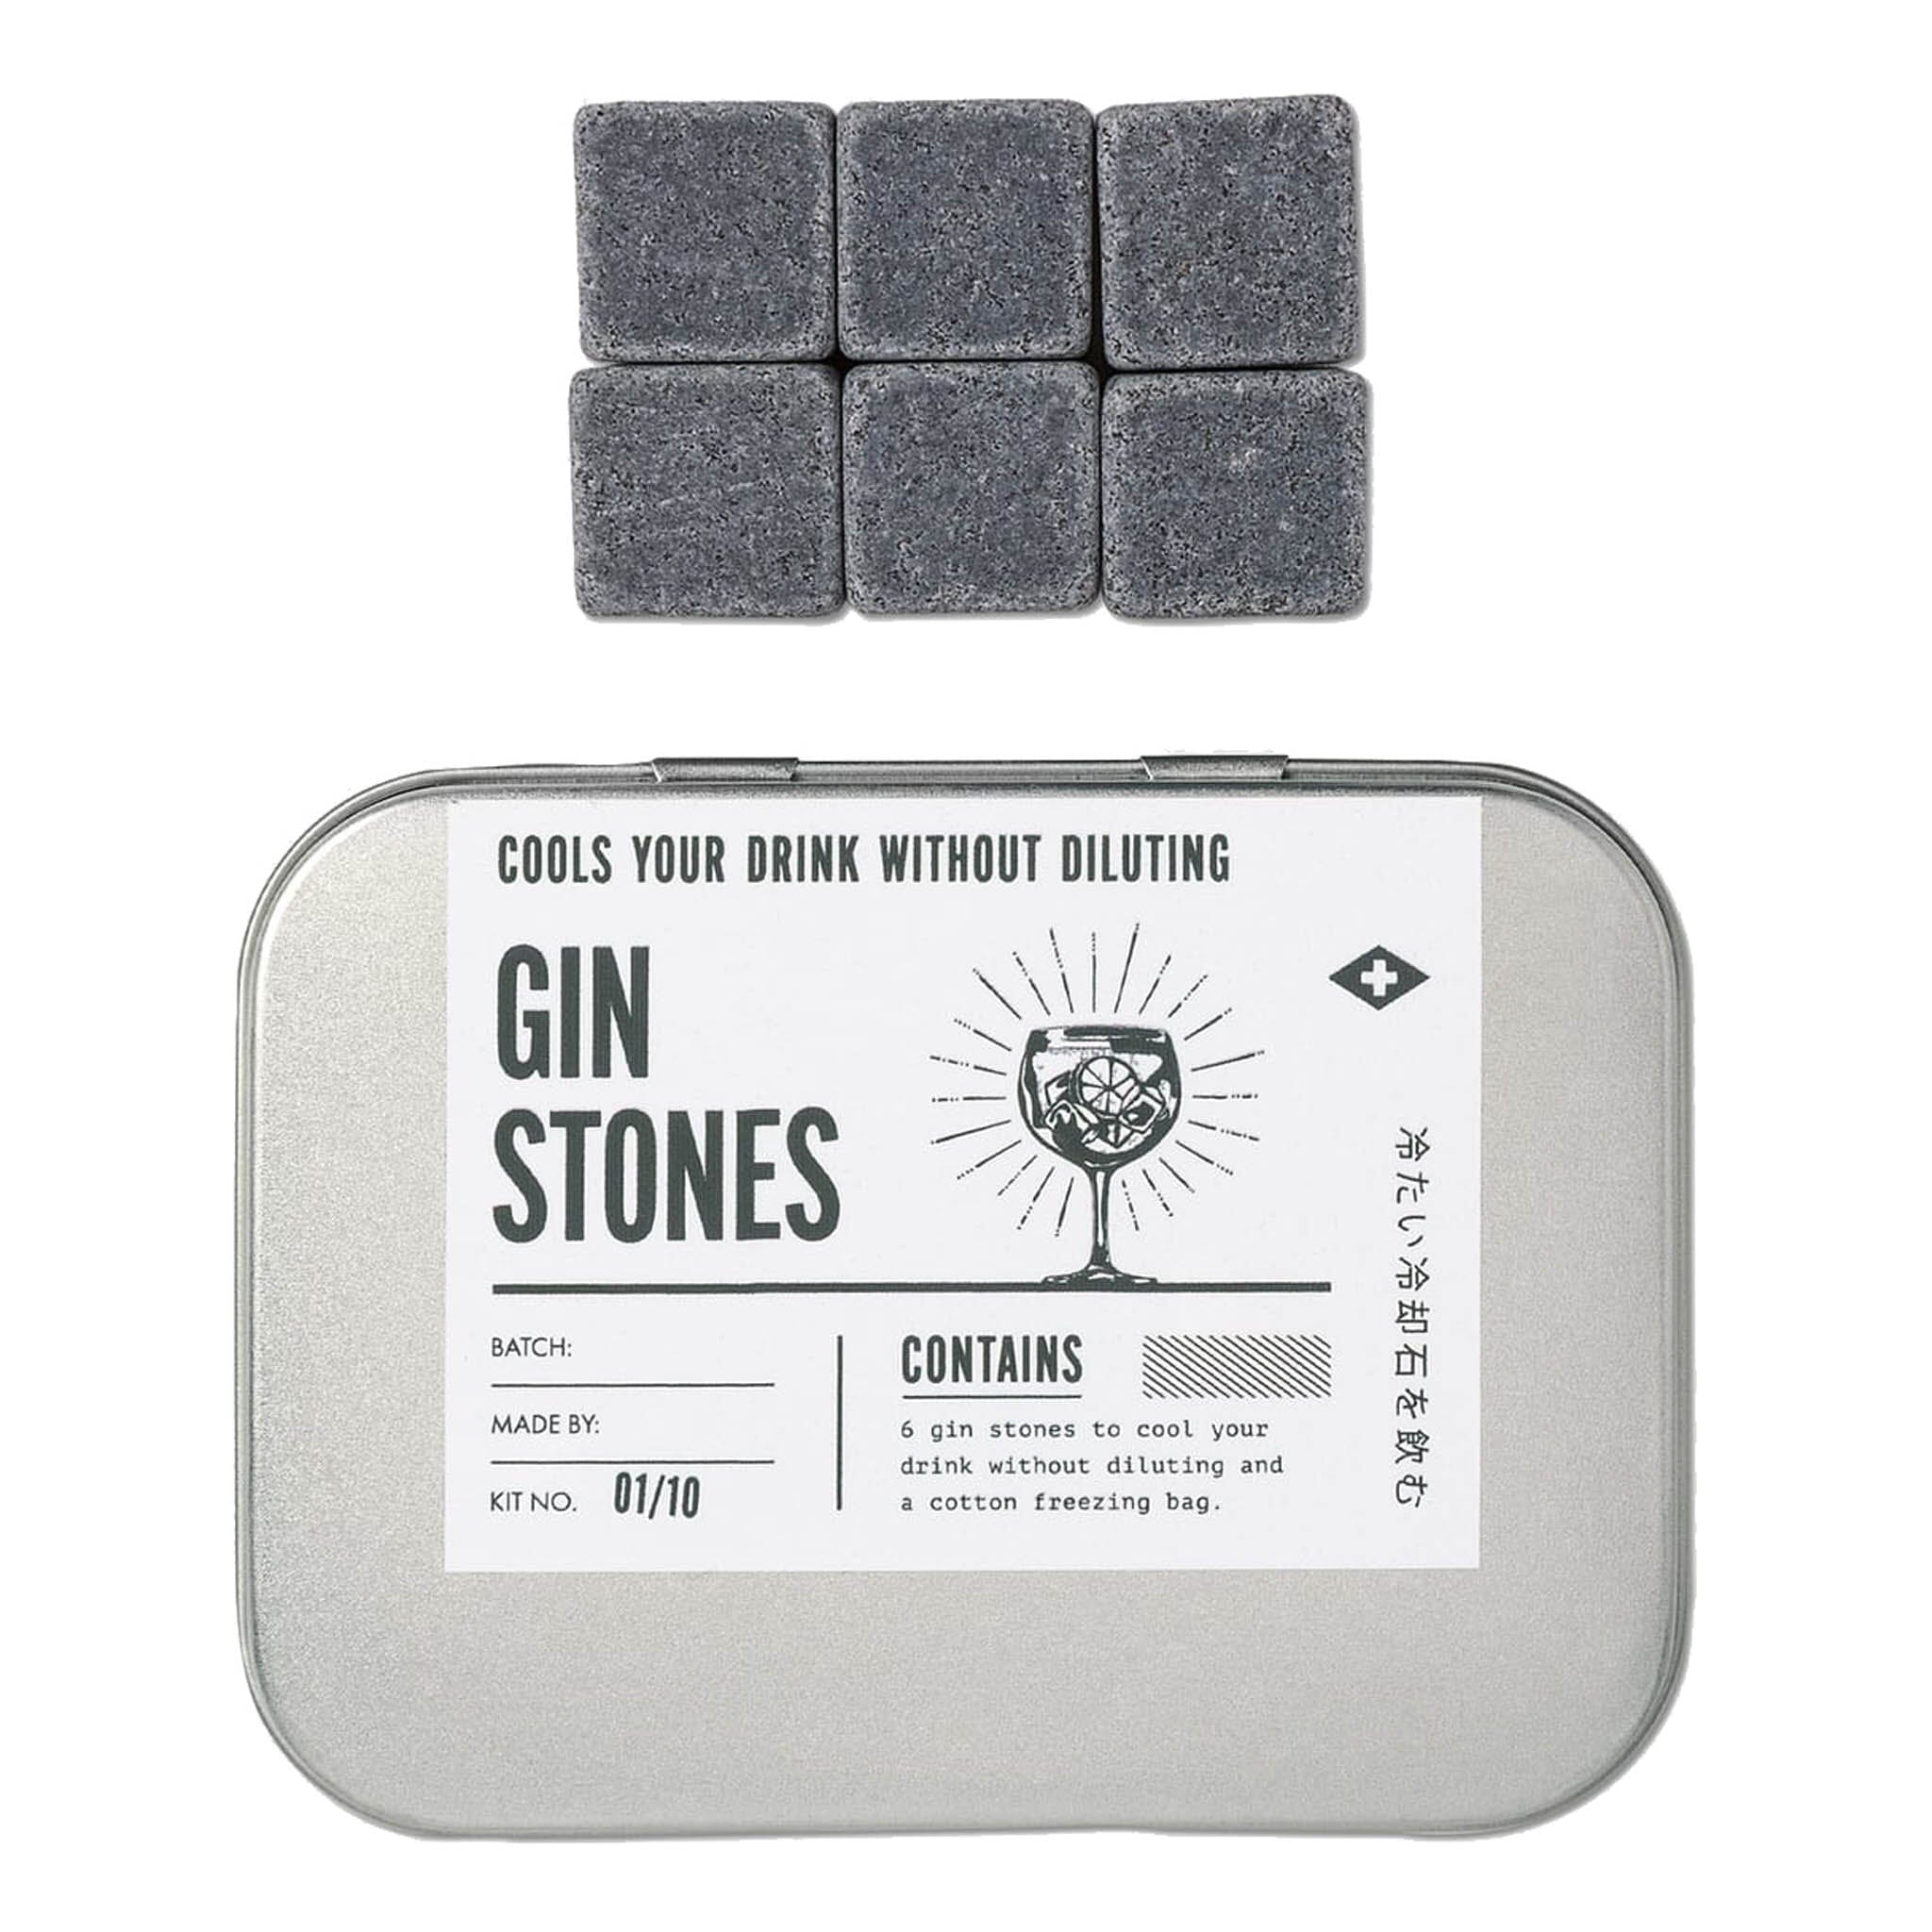 Men's Society Gin Cooling stones